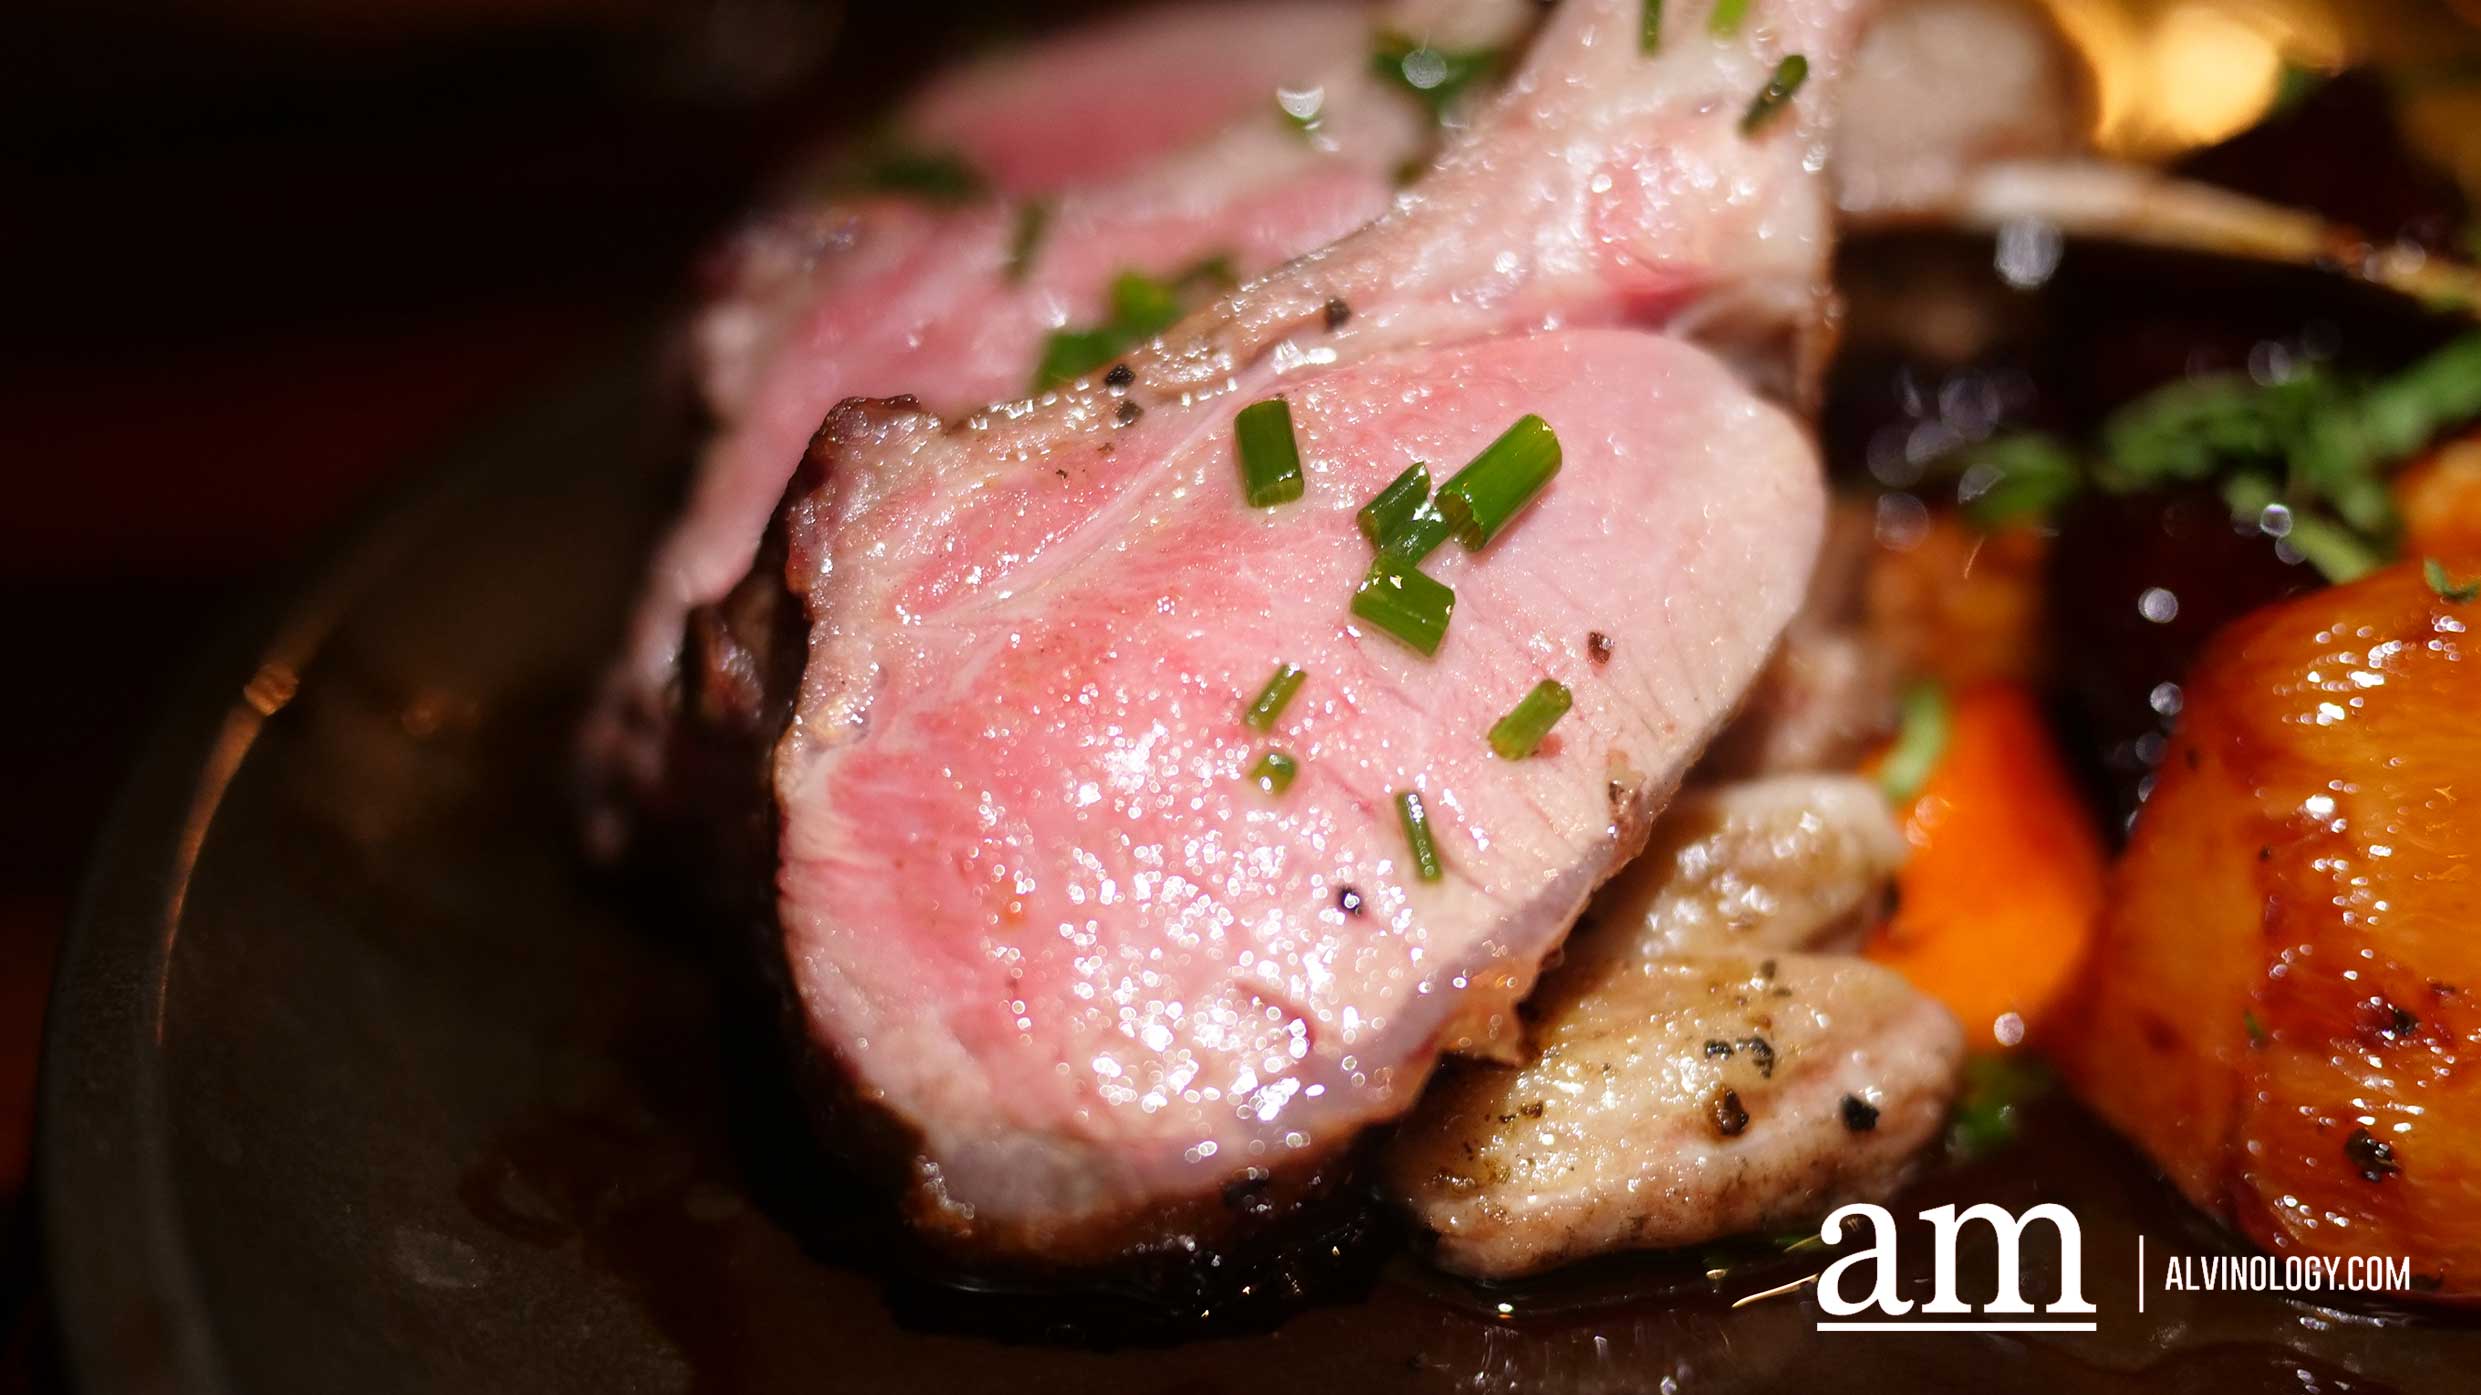 TE MANA LAMB, the Wagyu of Lambs, Debuts in Bedrock Bar & Grill’s World Meat Series - Alvinology